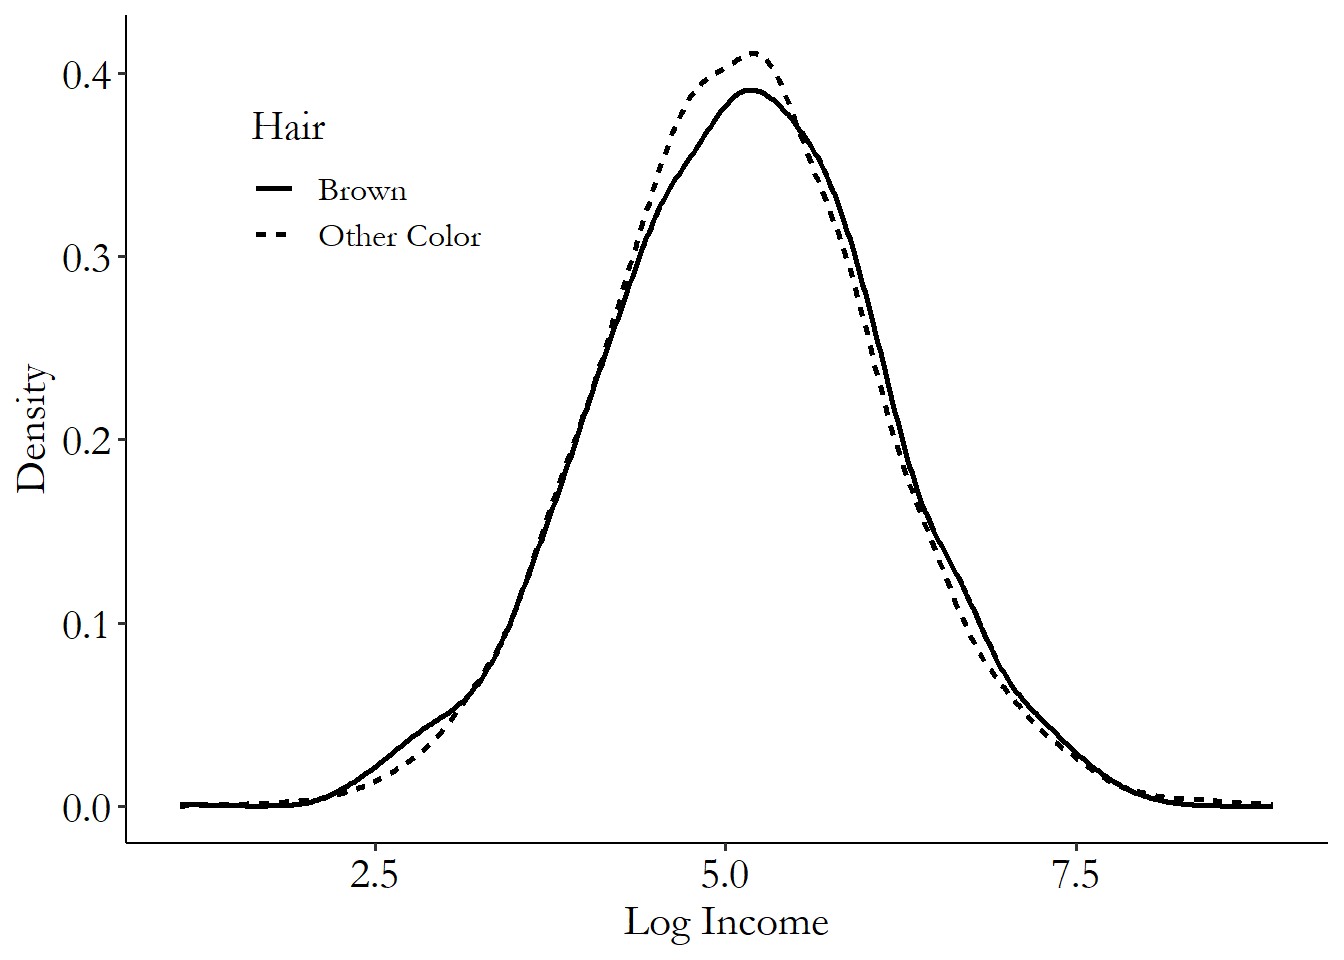 Two density plots that are very similar, one for those with brown hair and one for those with other colors, with the brown-hair one very slightly to the right to indicate more income.